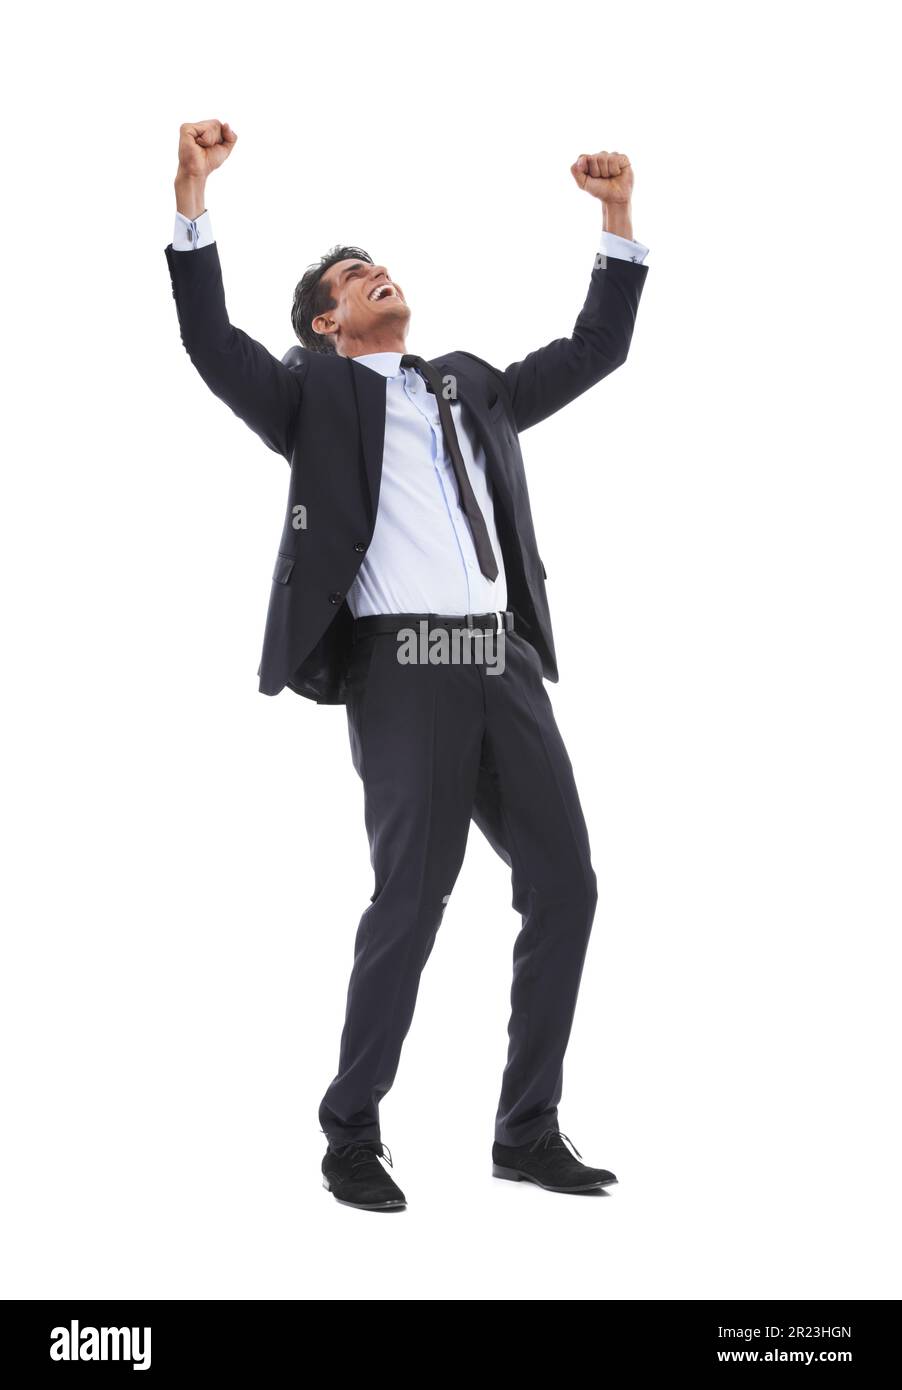 Basking in his success. A happy young businessman standing with fists raised int he air in gesture of victory against a white background. Stock Photo